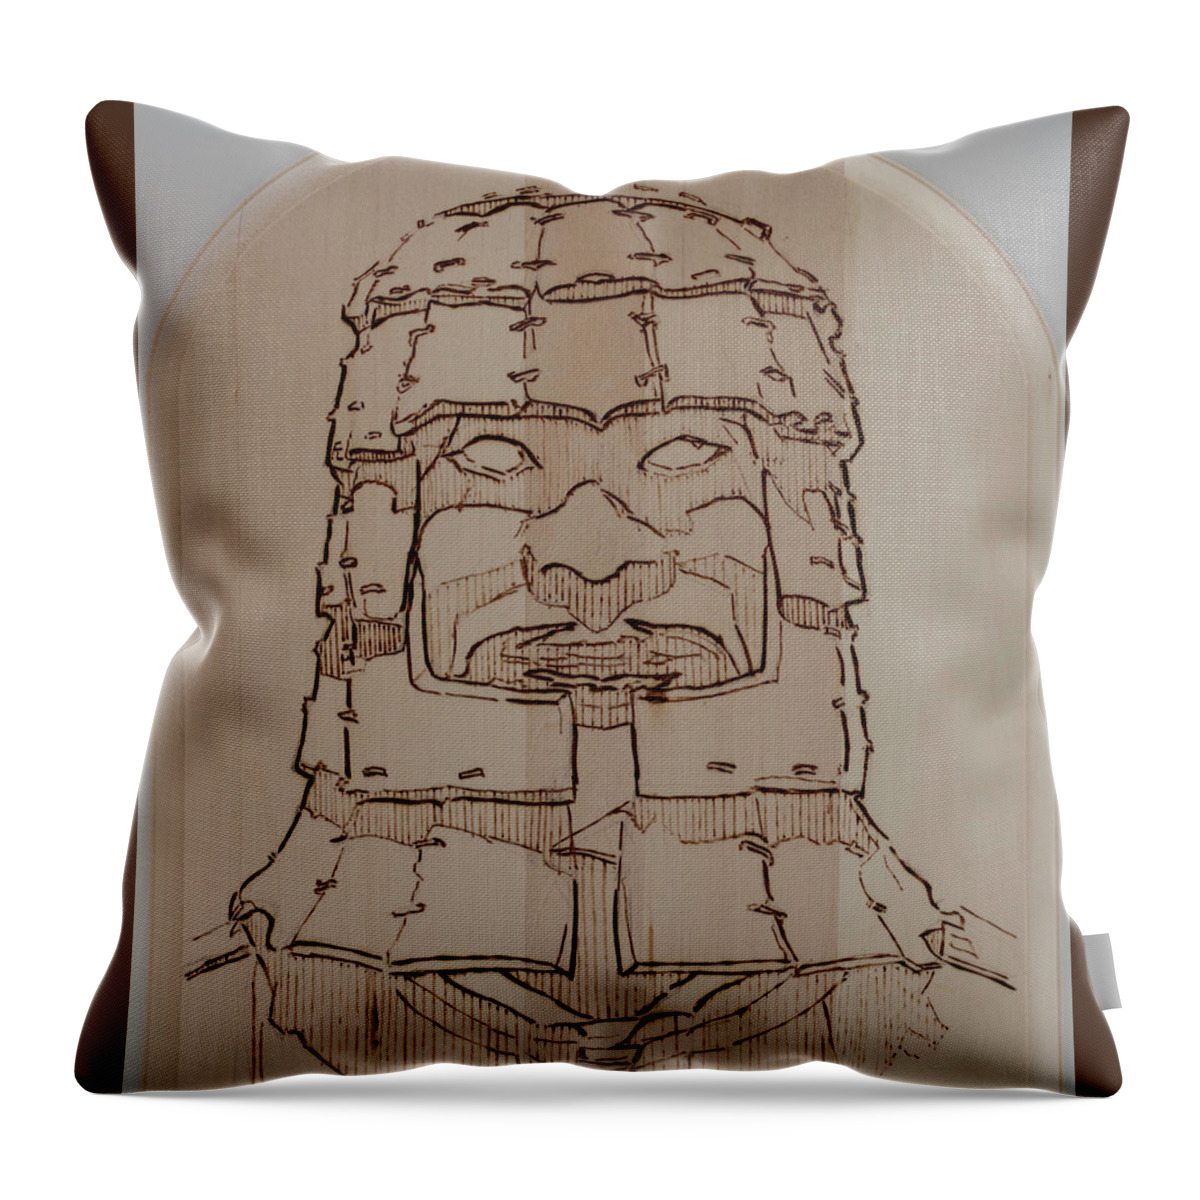 Pyrography Throw Pillow featuring the pyrography Terracotta Warrior - Unearthed by Sean Connolly